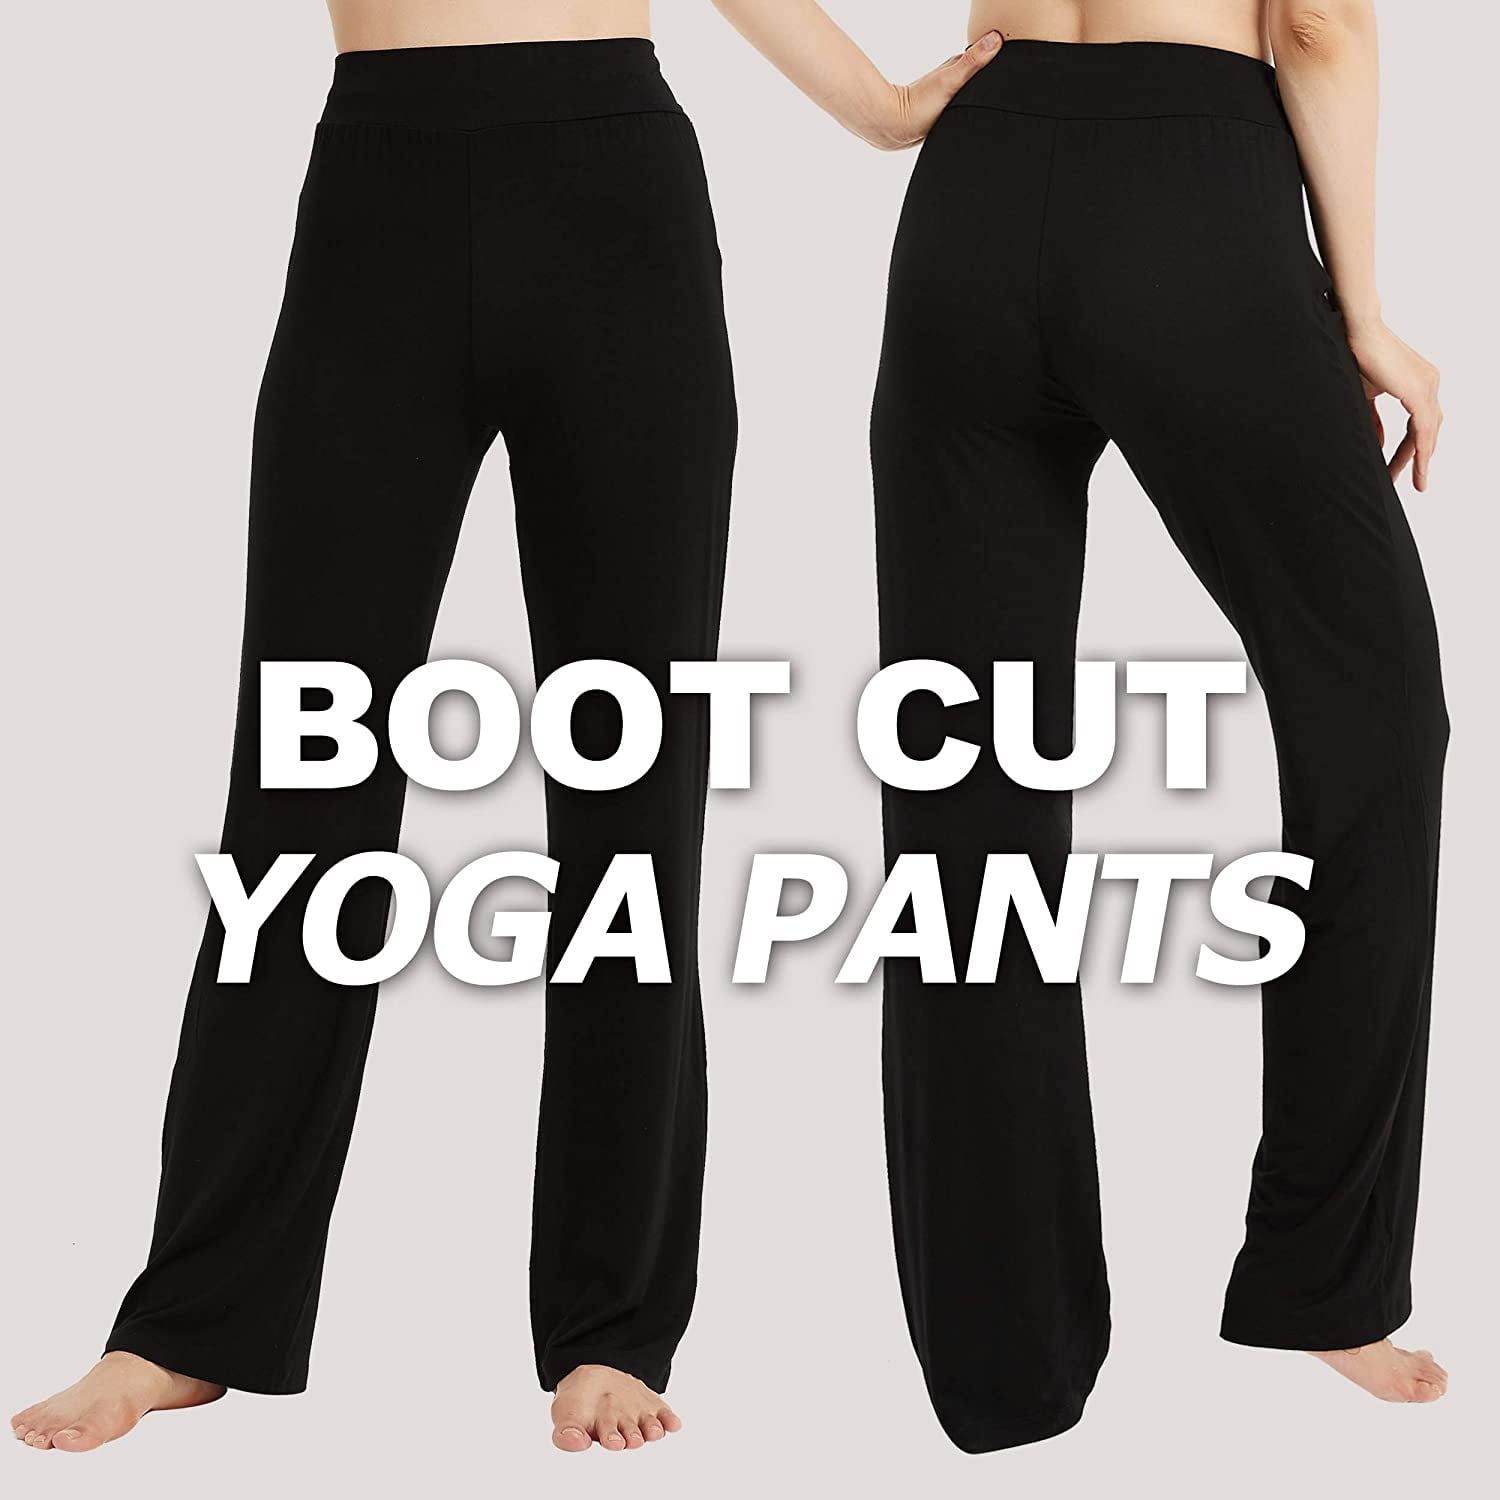 How To Wear Bootcut Yoga Pants